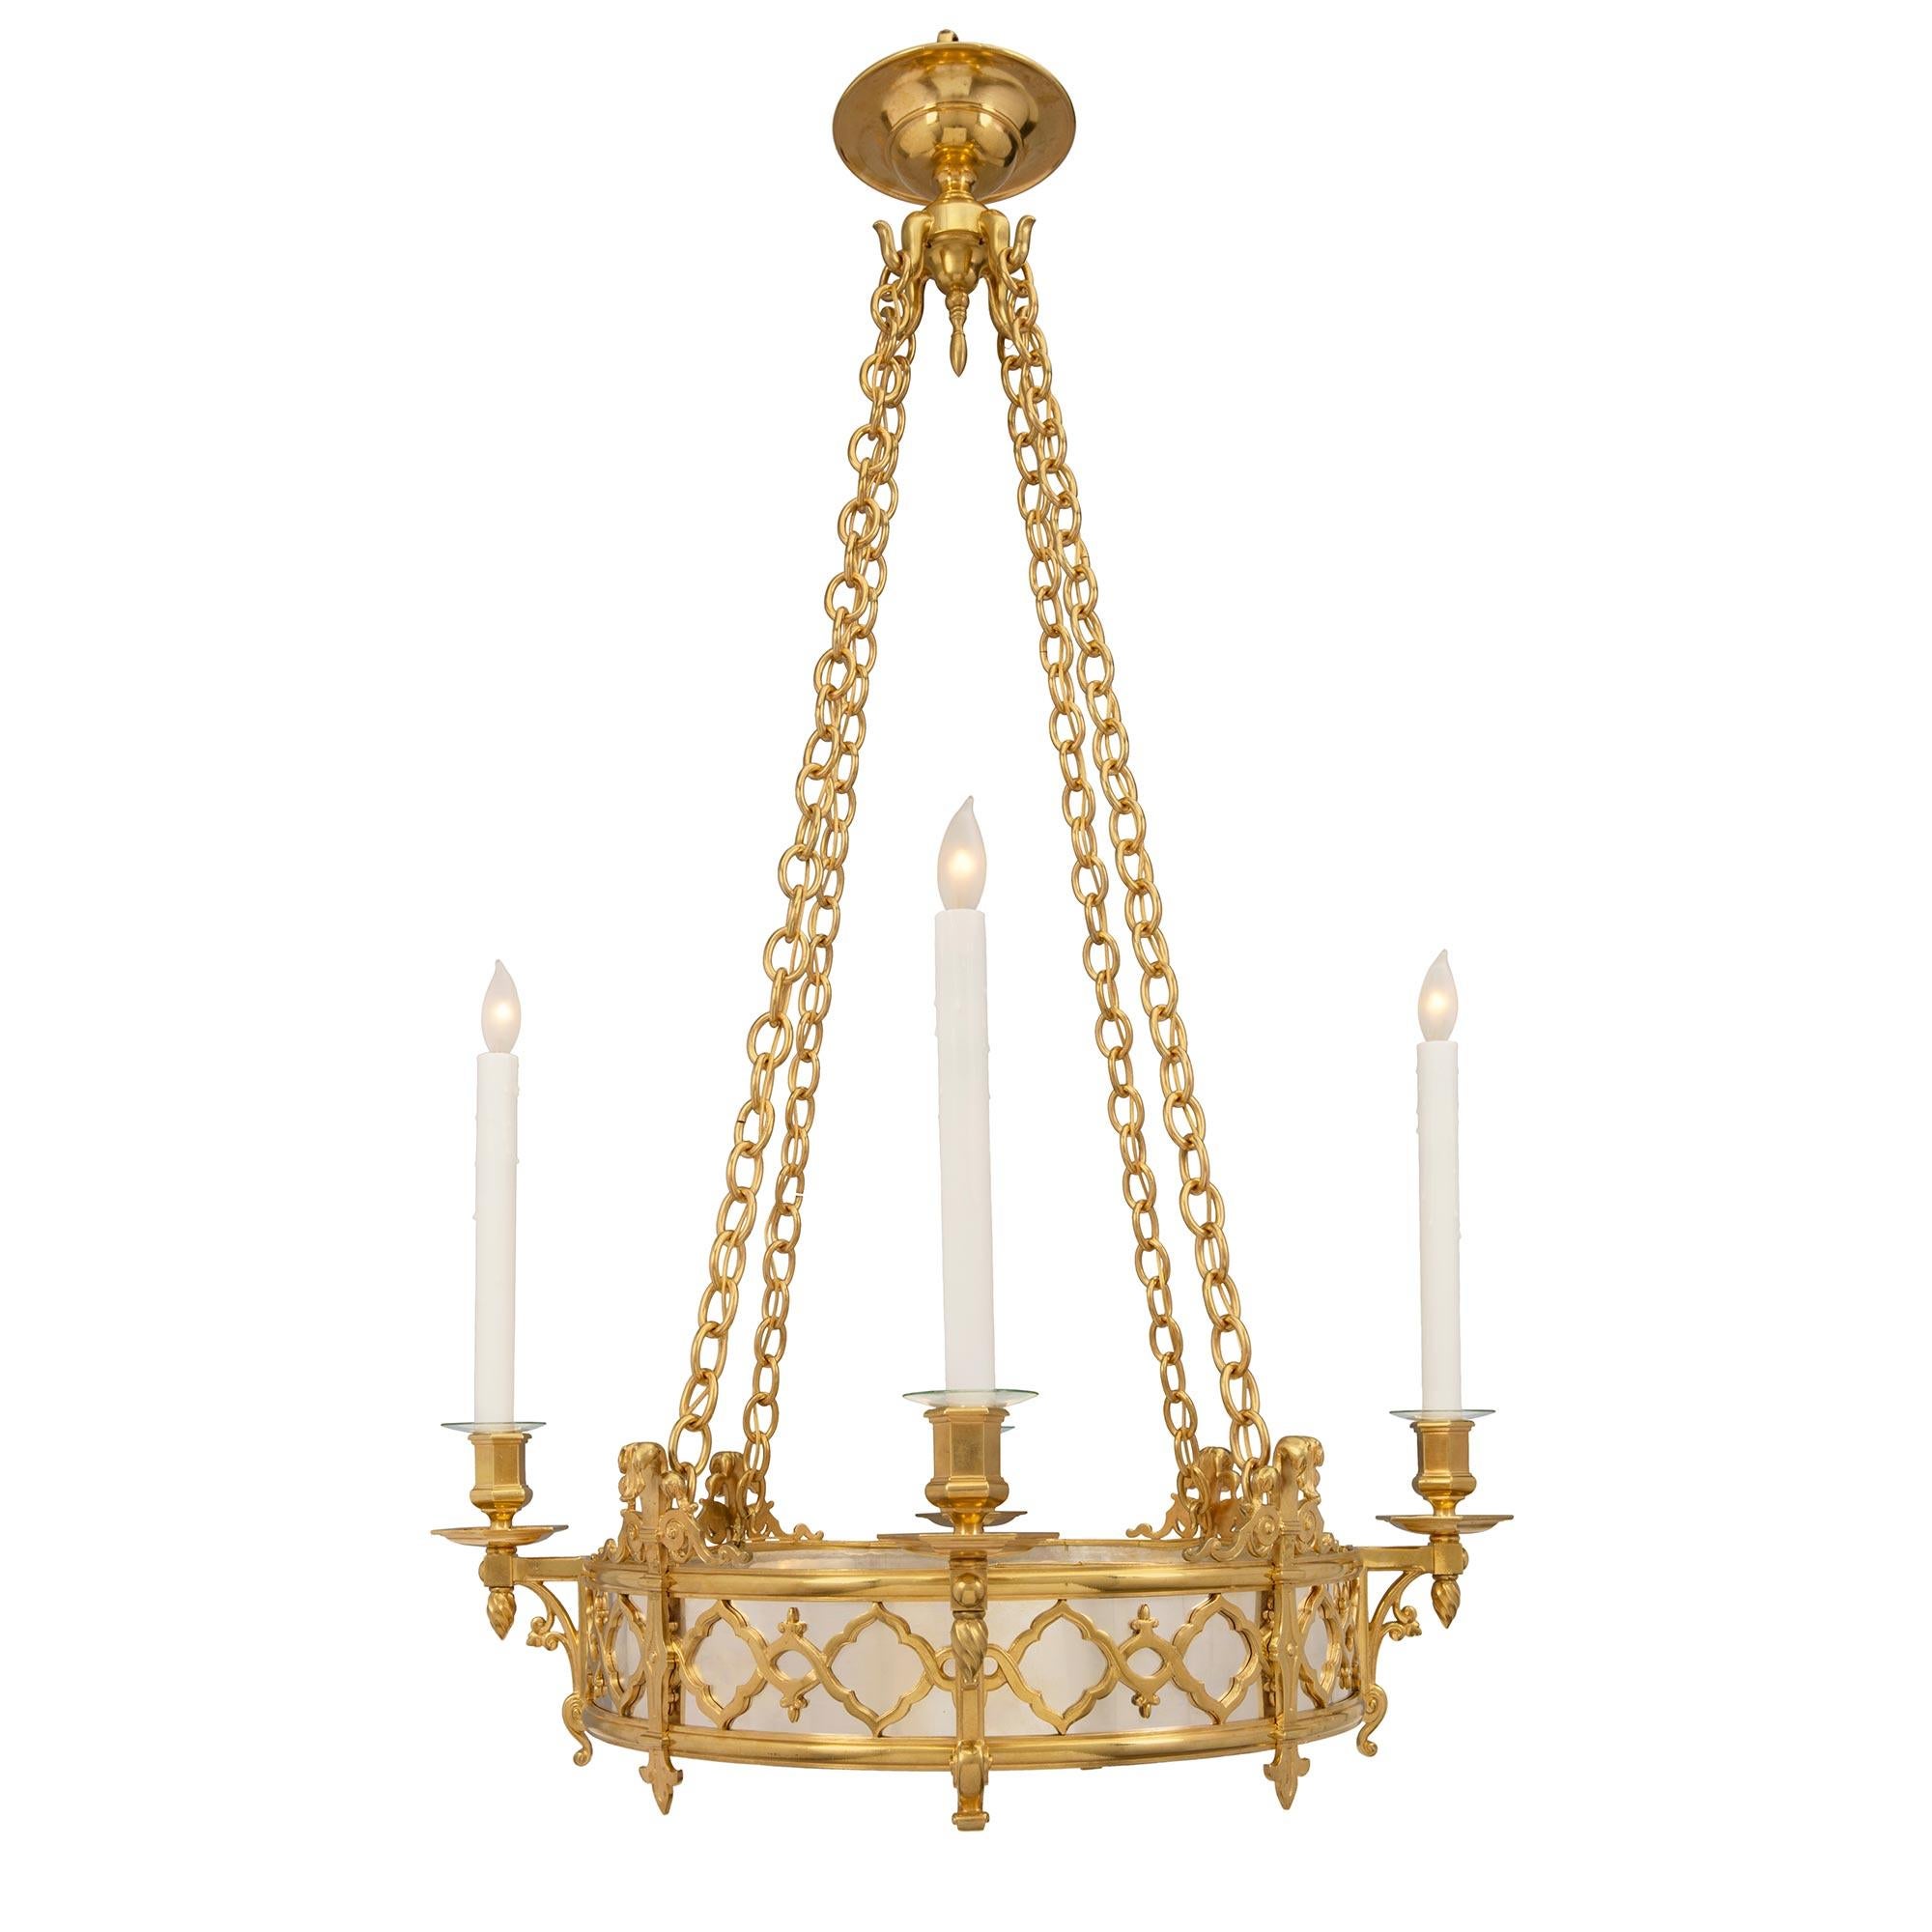 A striking French 19th century Renaissance st. four arm, ten light, ormolu, silvered bronze and frosted glass chandelier. The chandelier is centered by a striking circular fitted frosted glass bottom with beautiful and most decorative etched star